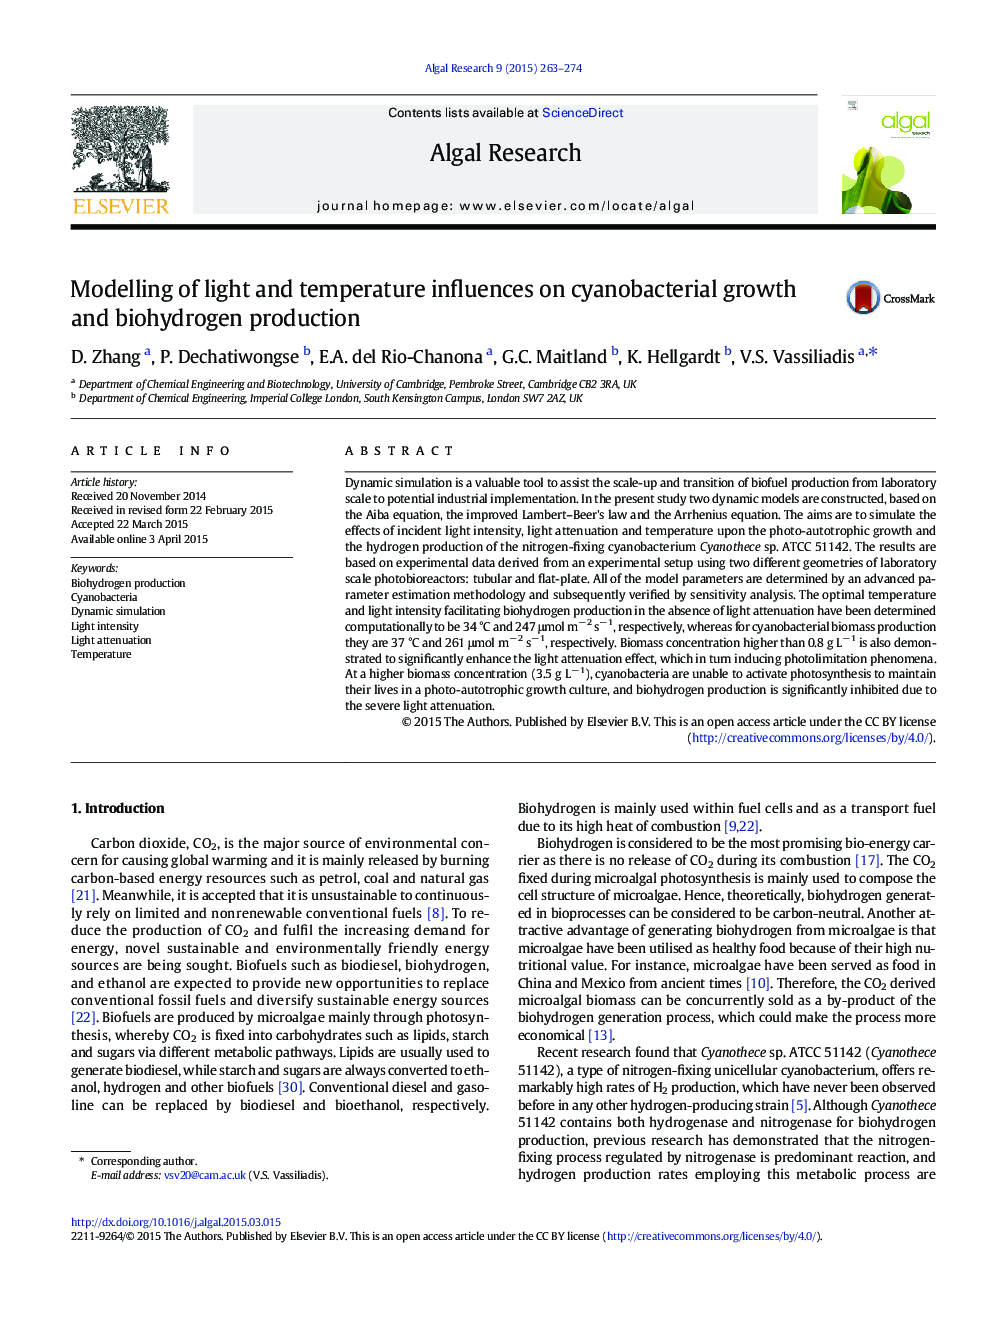 Modelling of light and temperature influences on cyanobacterial growth and biohydrogen production